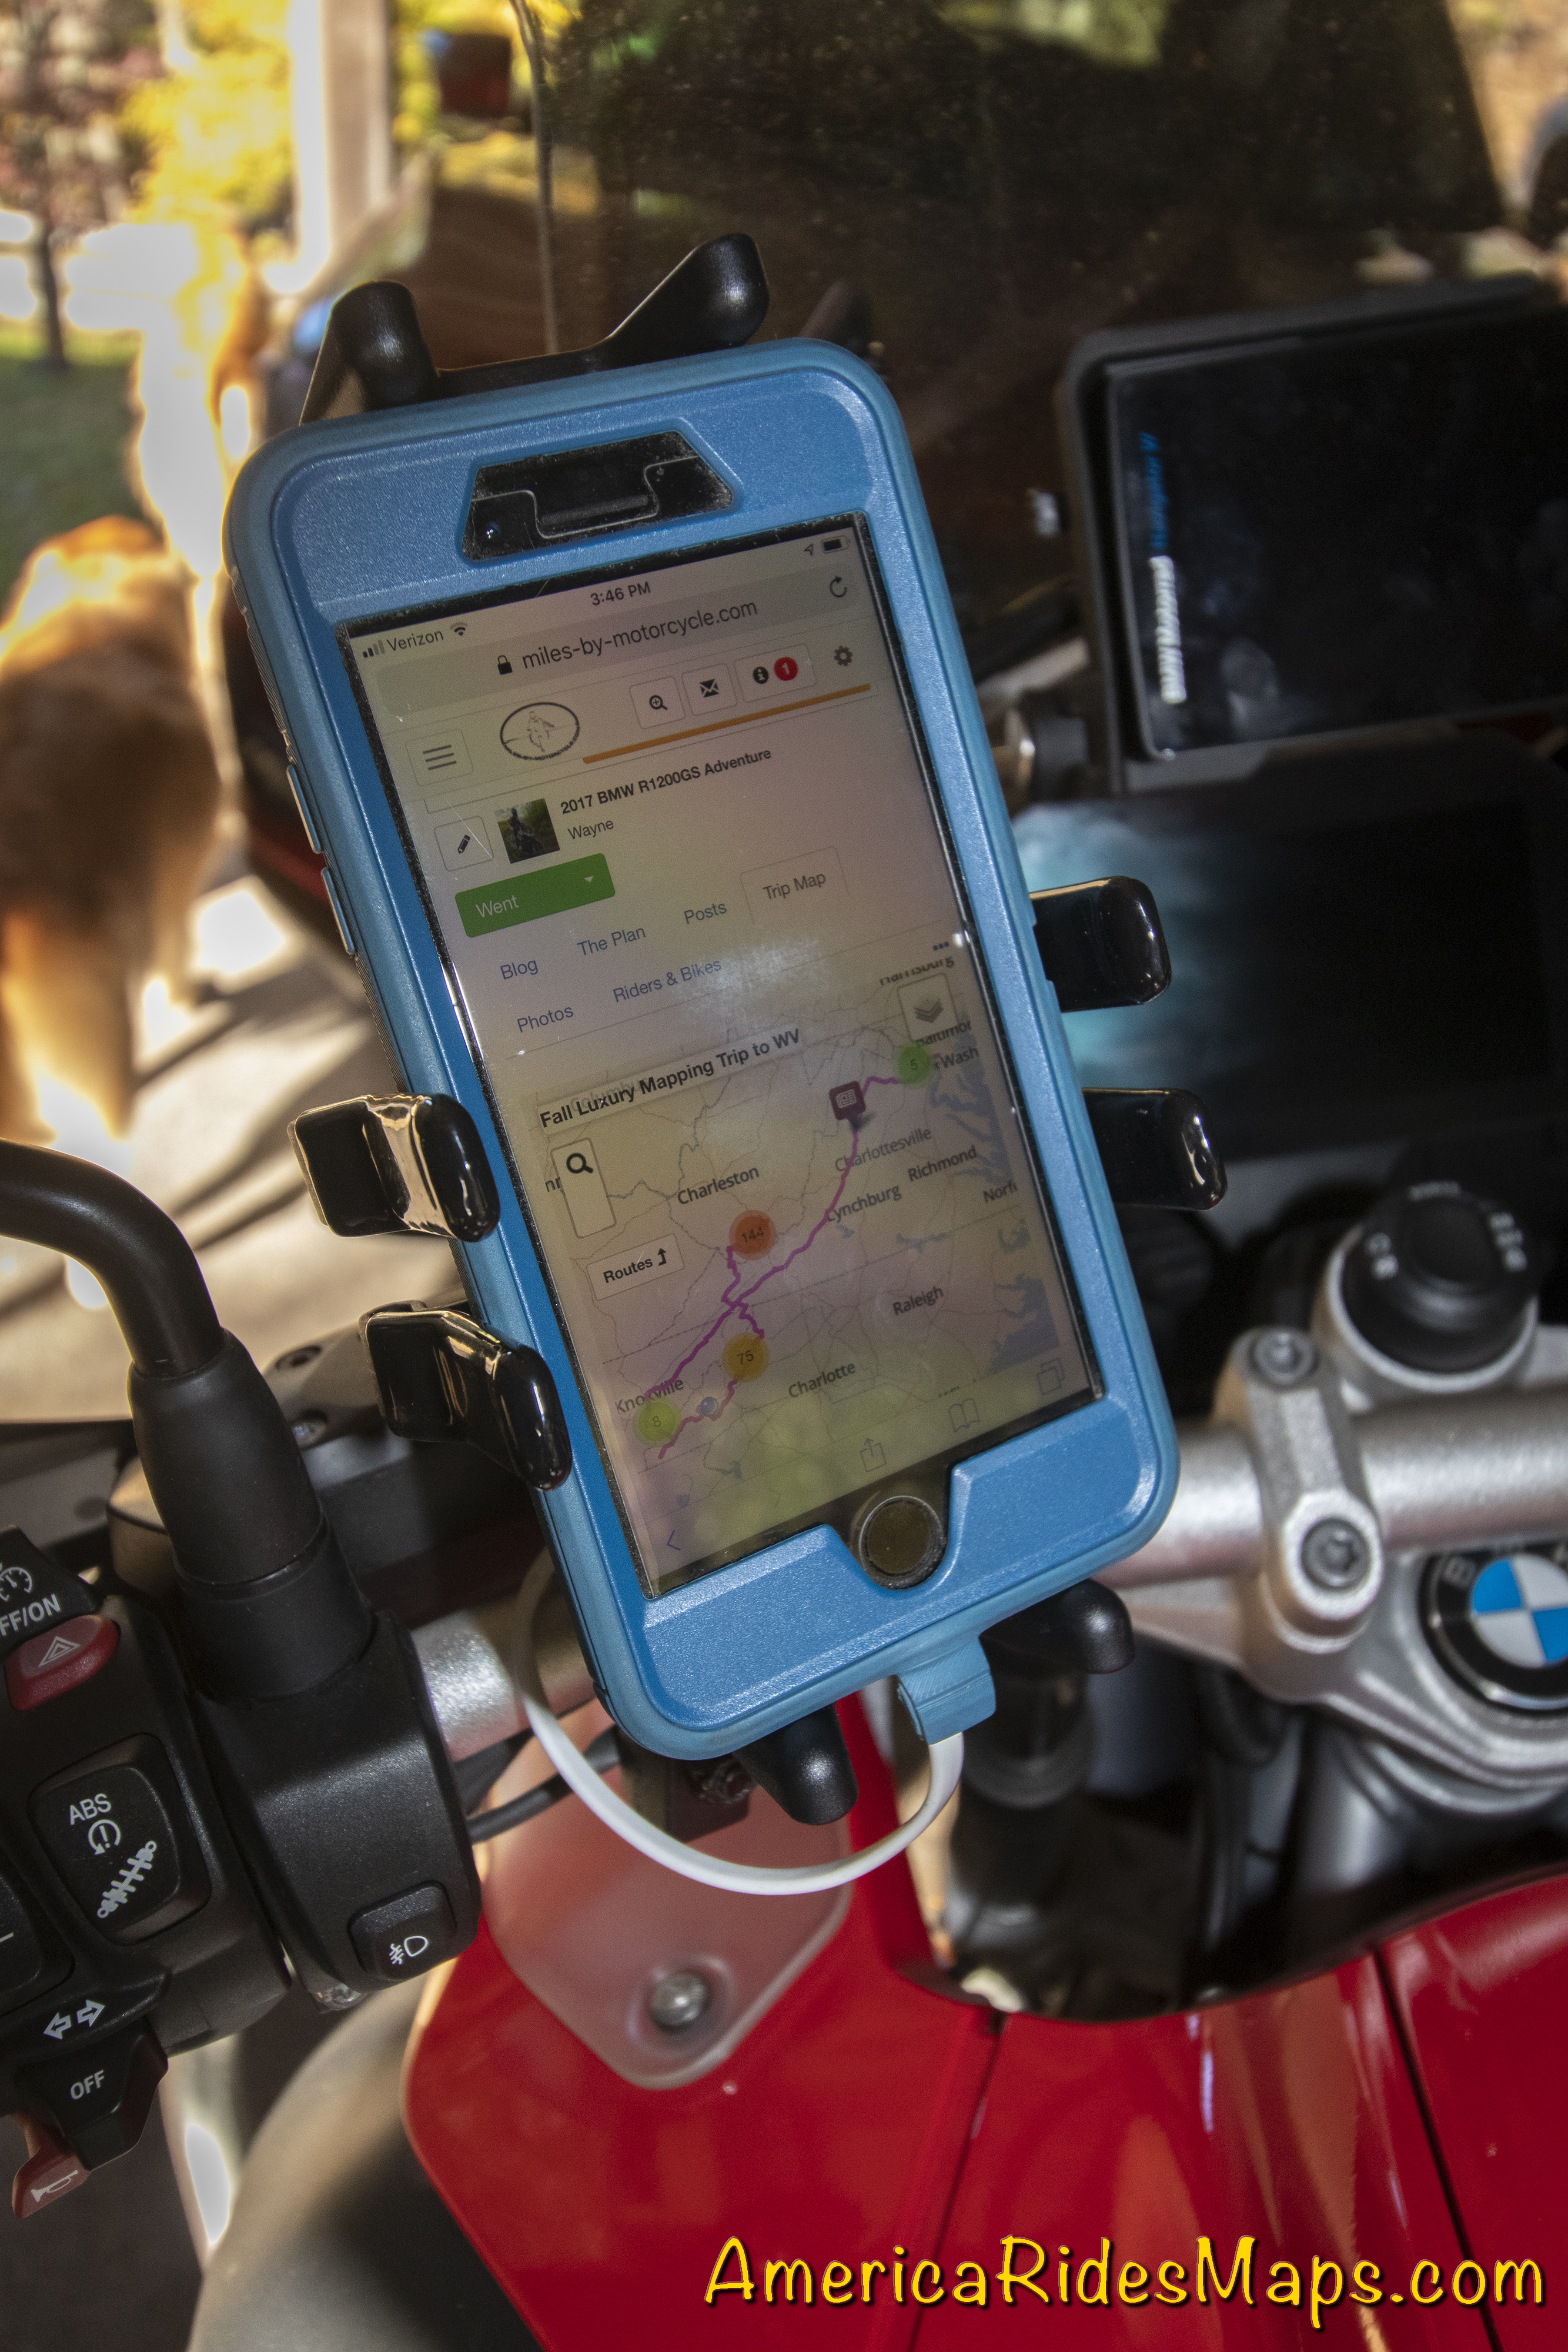 RAM Finger Grip Mount with phone